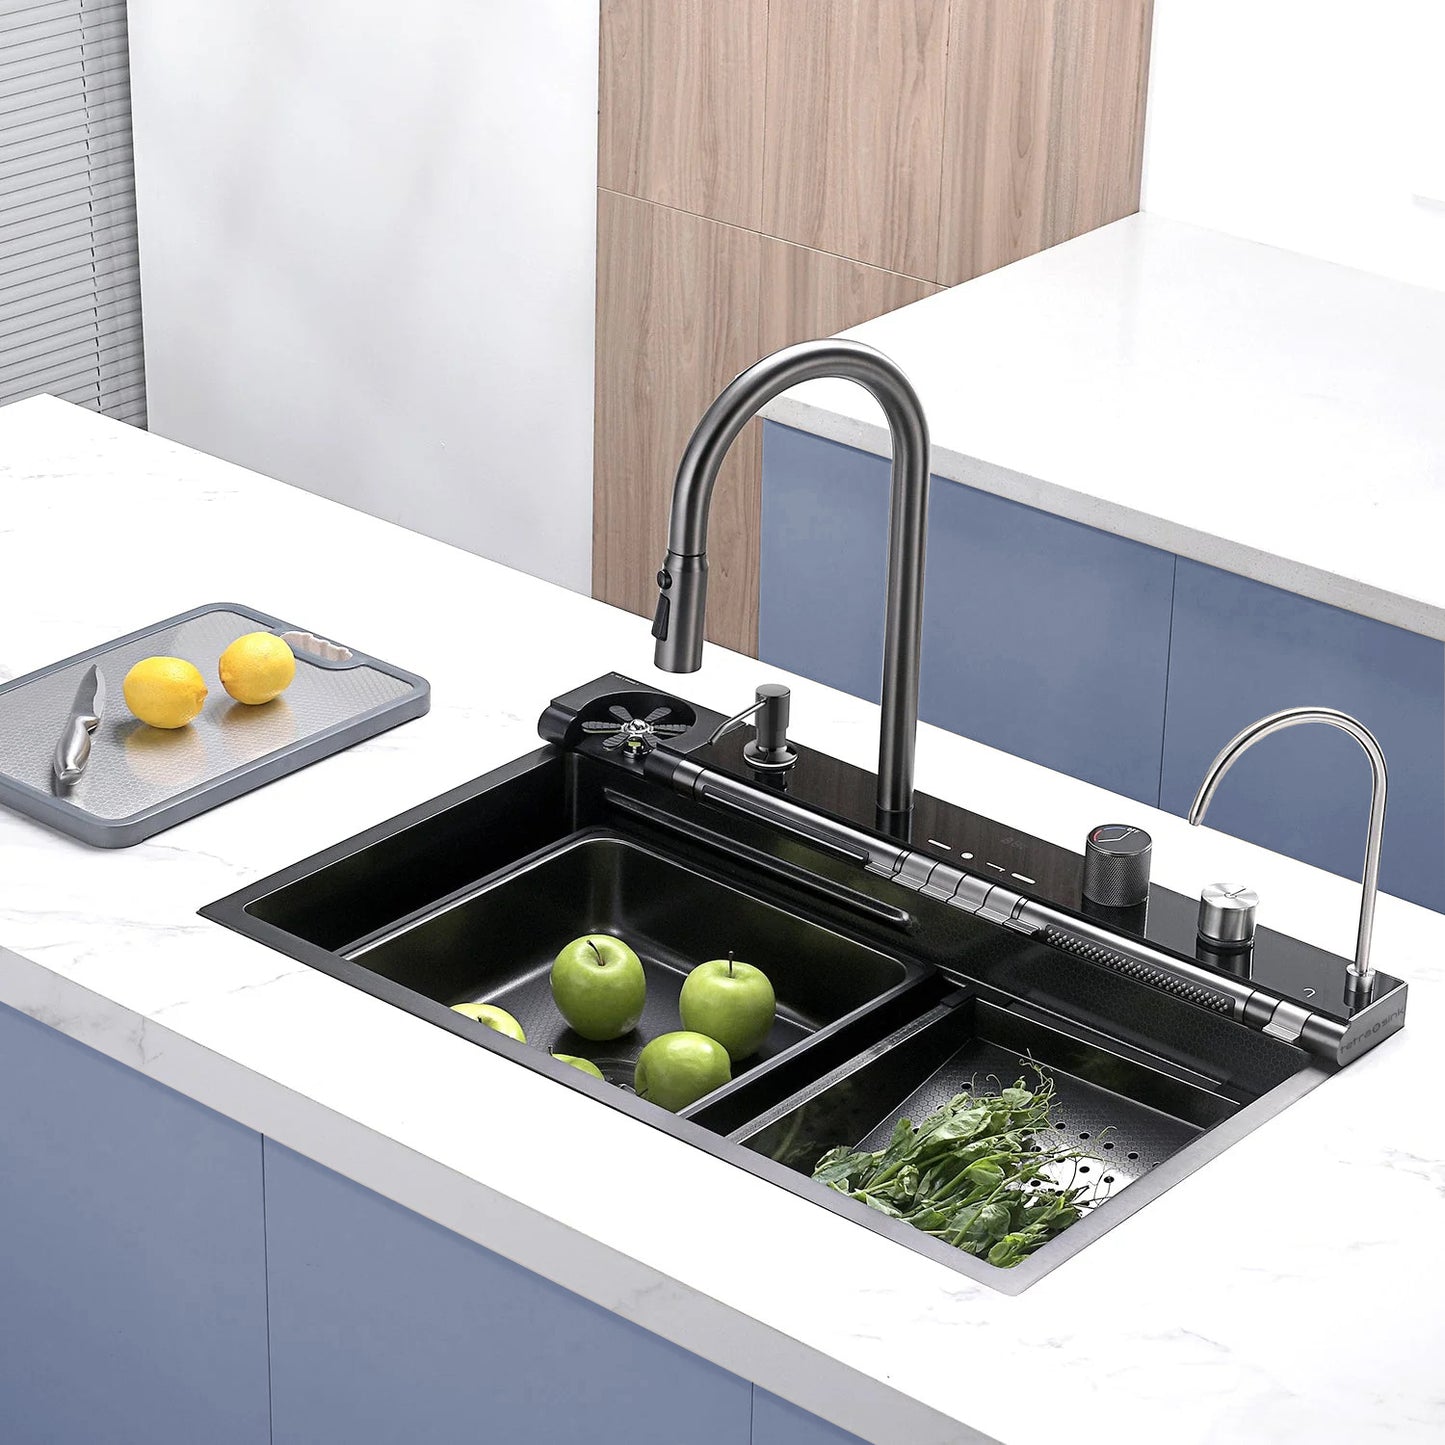 Multifunctional-deep-kitchen-sink-with-Multifunctional-mixing-system-TETRA-SINK-24BS304R75-1